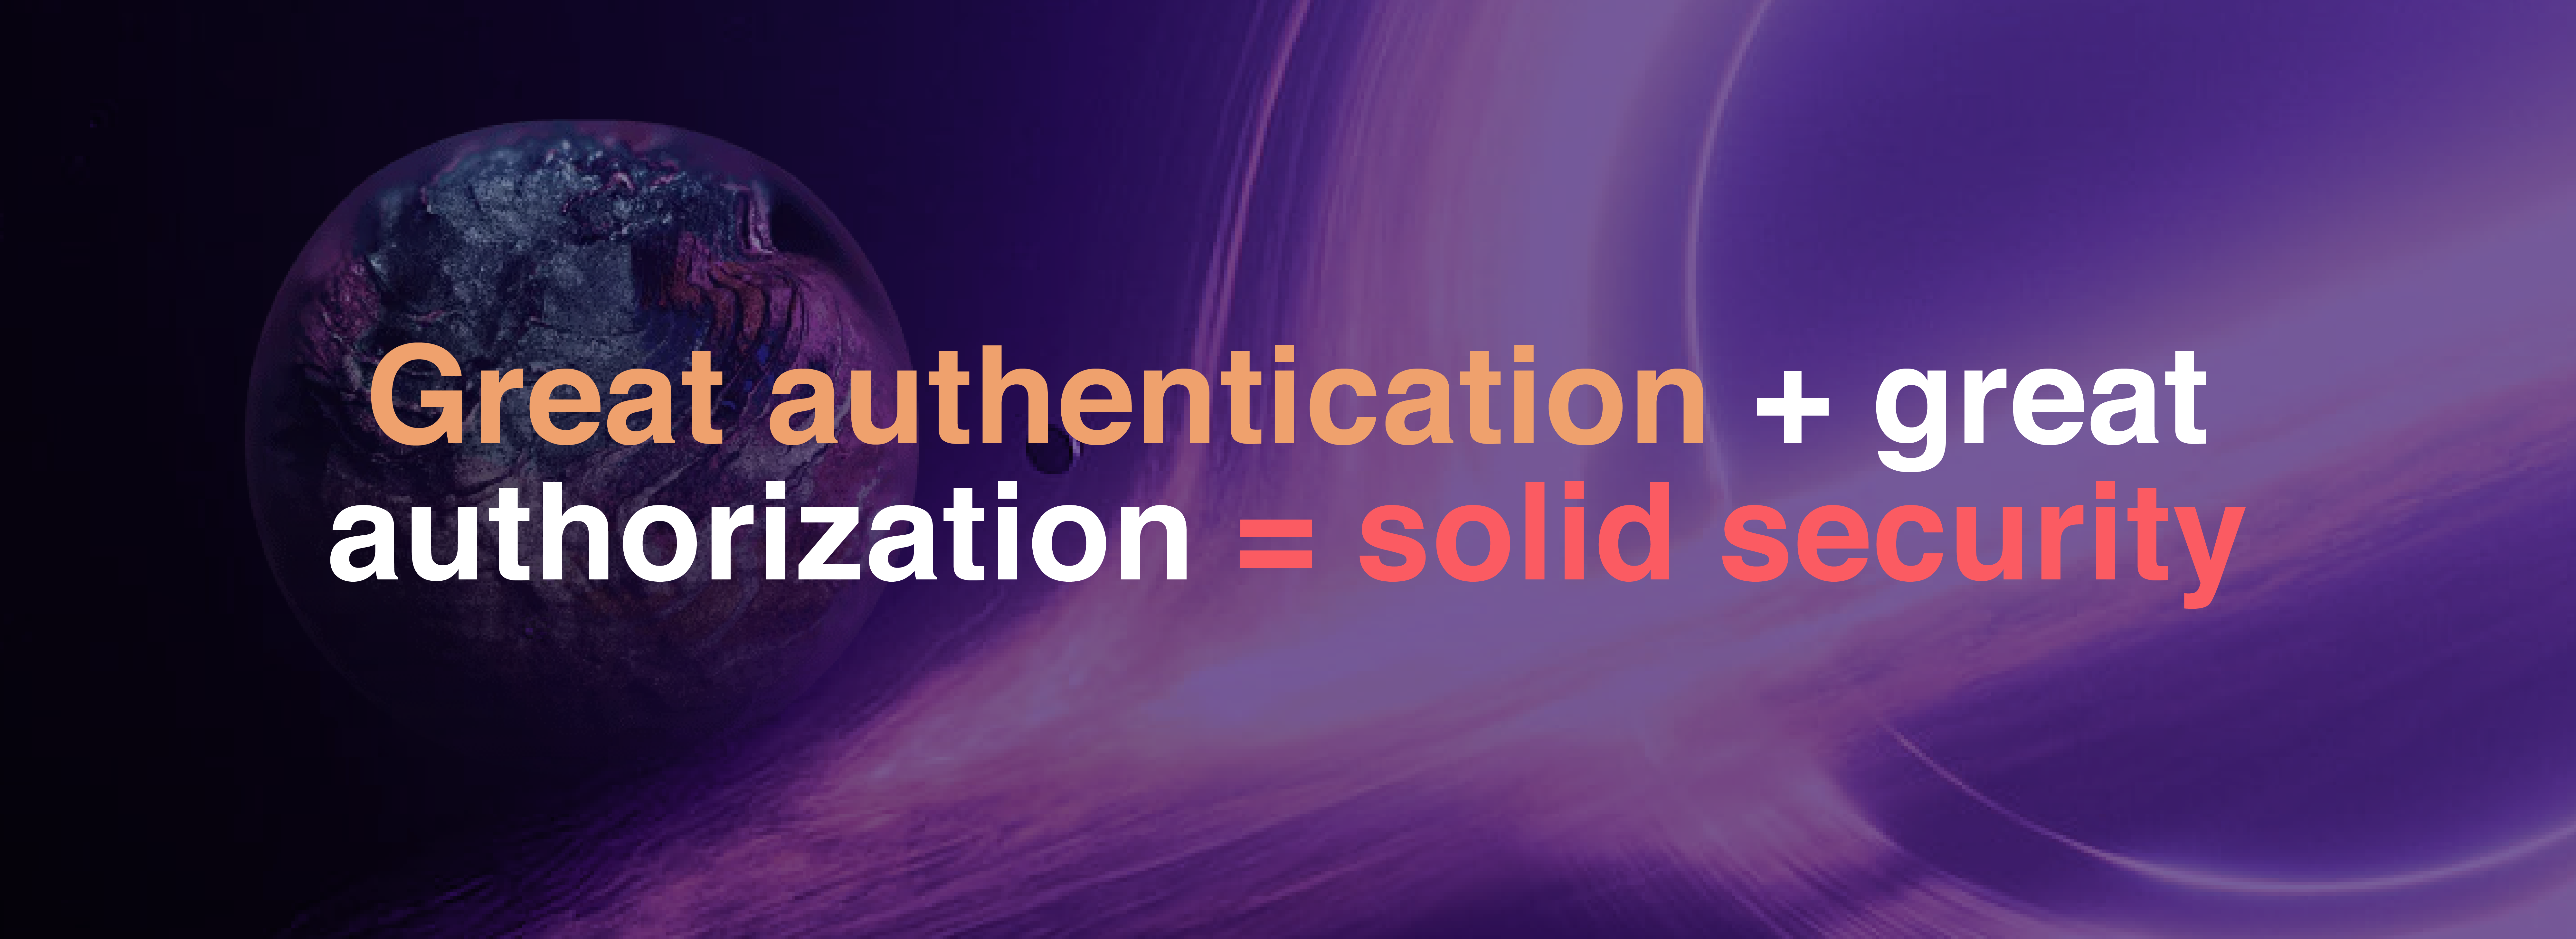 Great Authentication + Great Authorization = Solid Security 